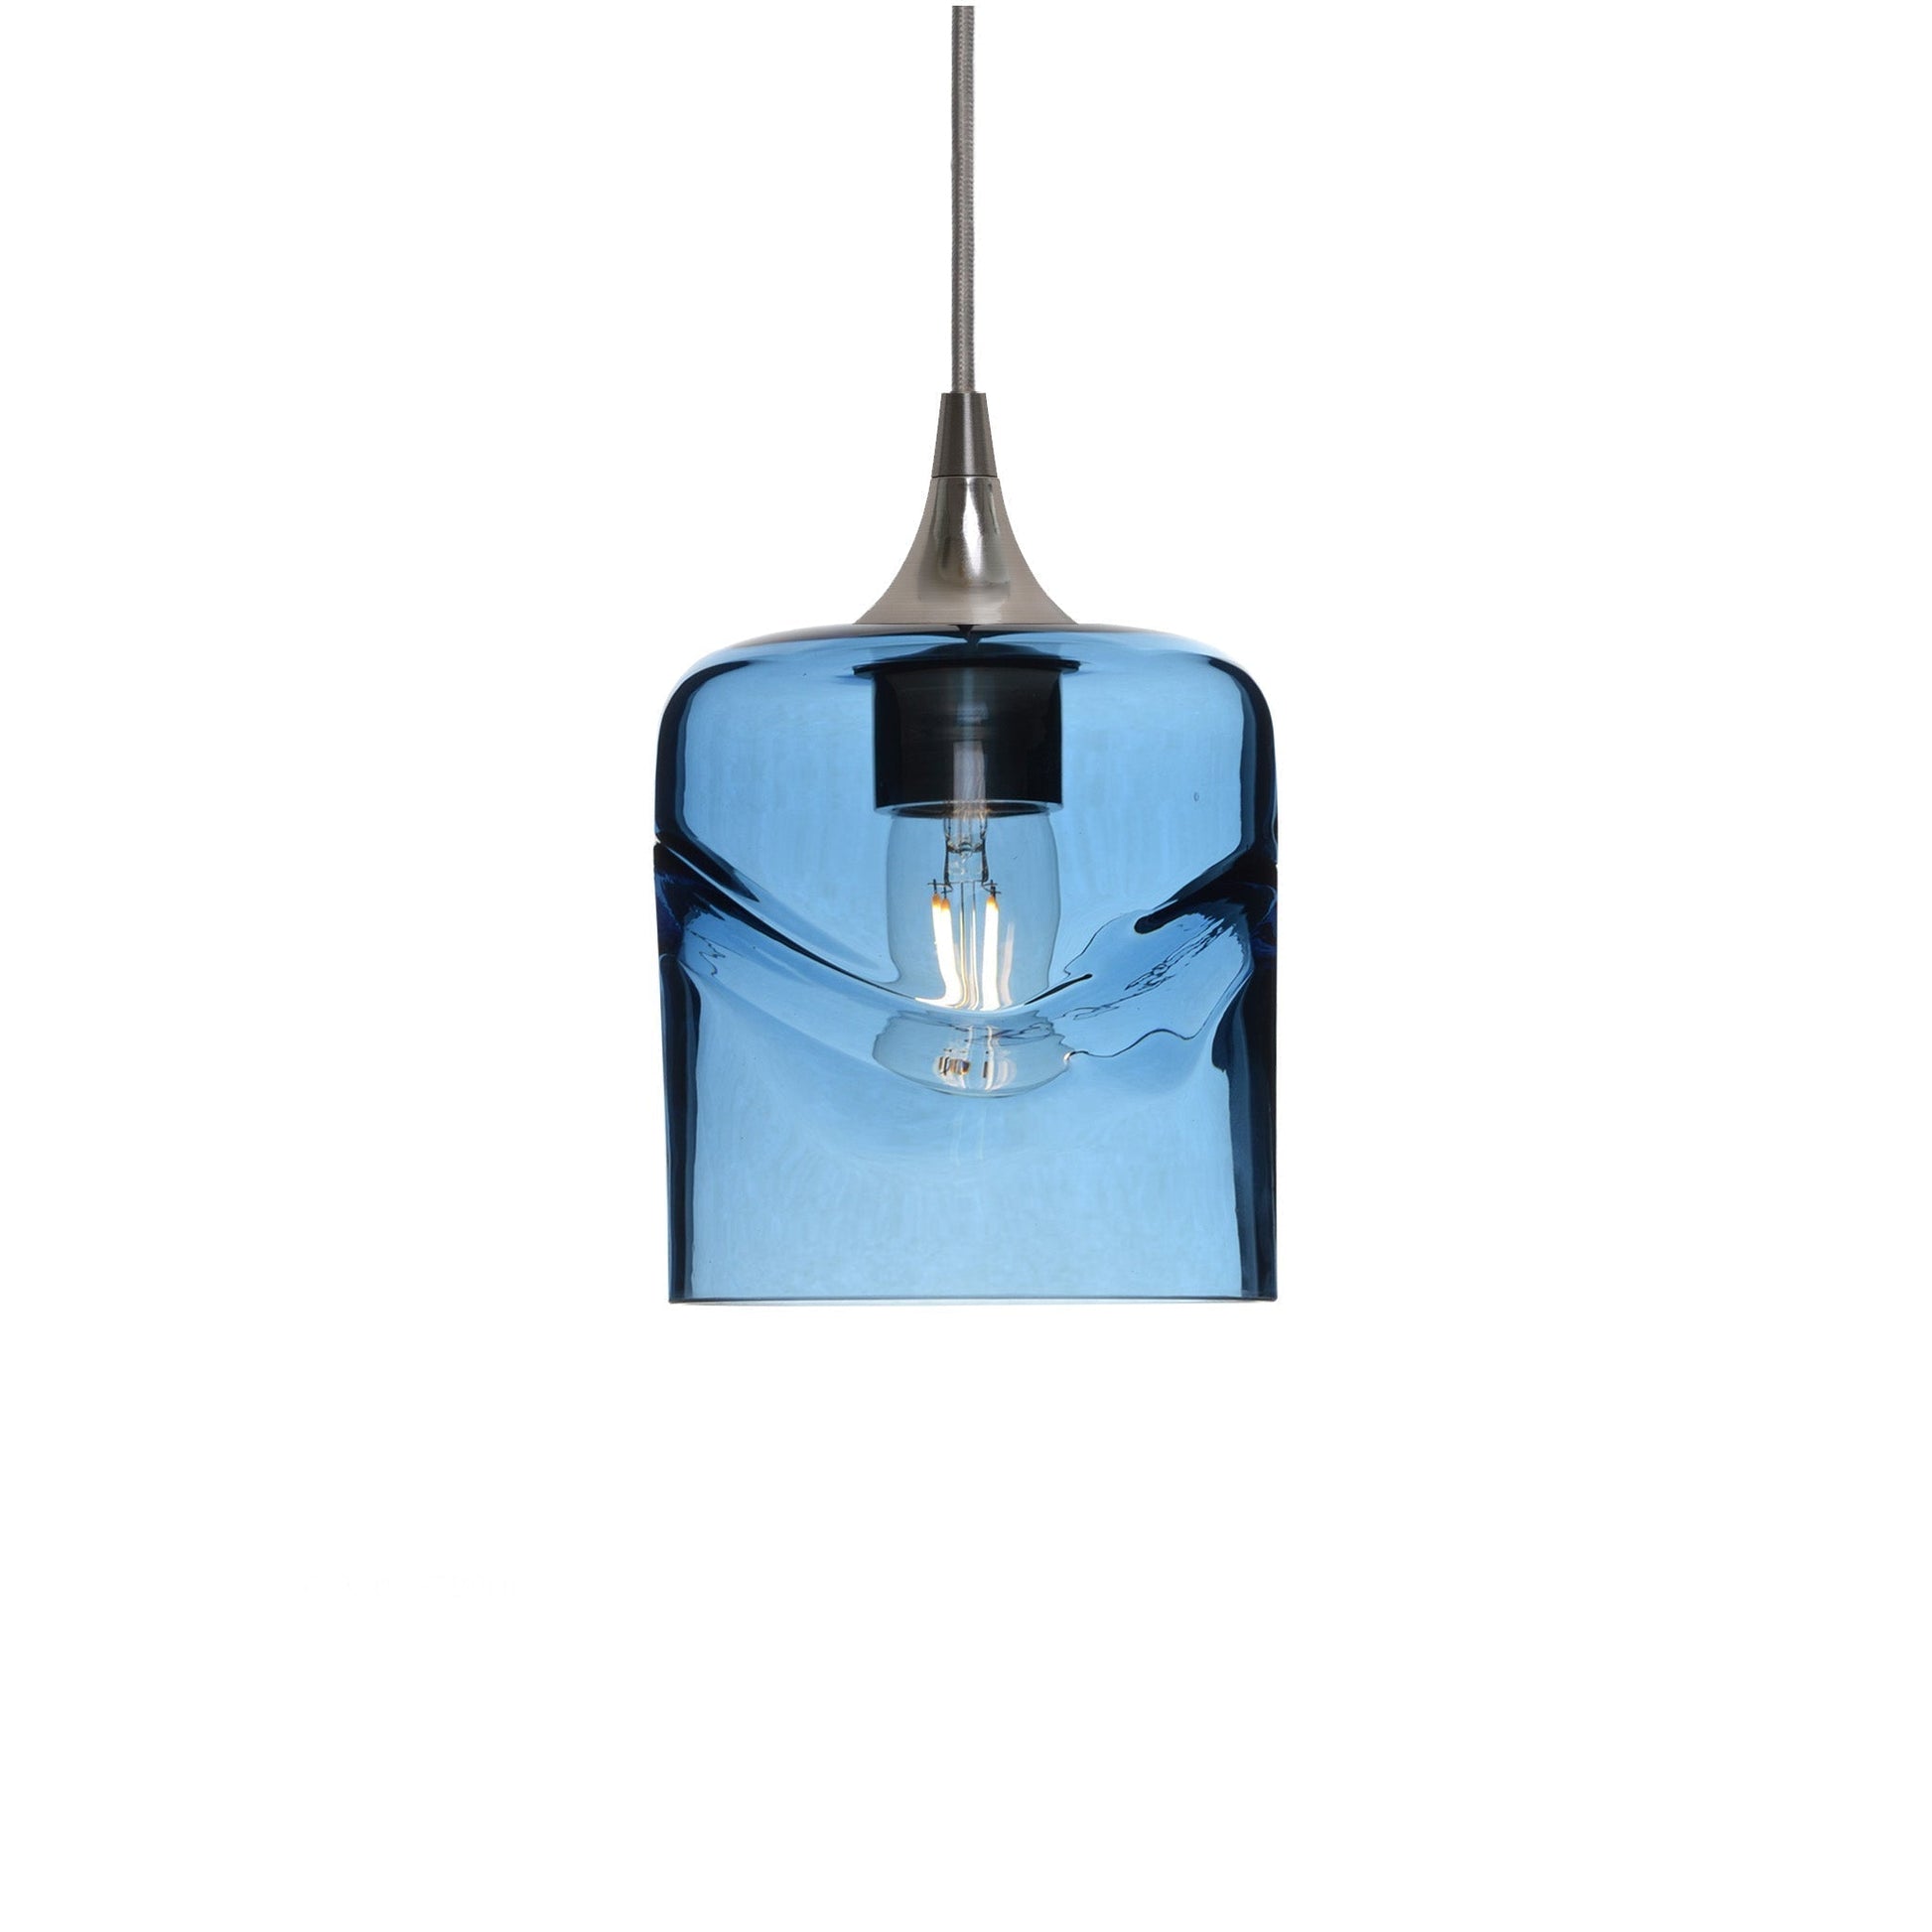 603 Swell: Single Pendant Light-Glass-Bicycle Glass Co - Hotshop-Steel Blue-Bicycle Glass Co